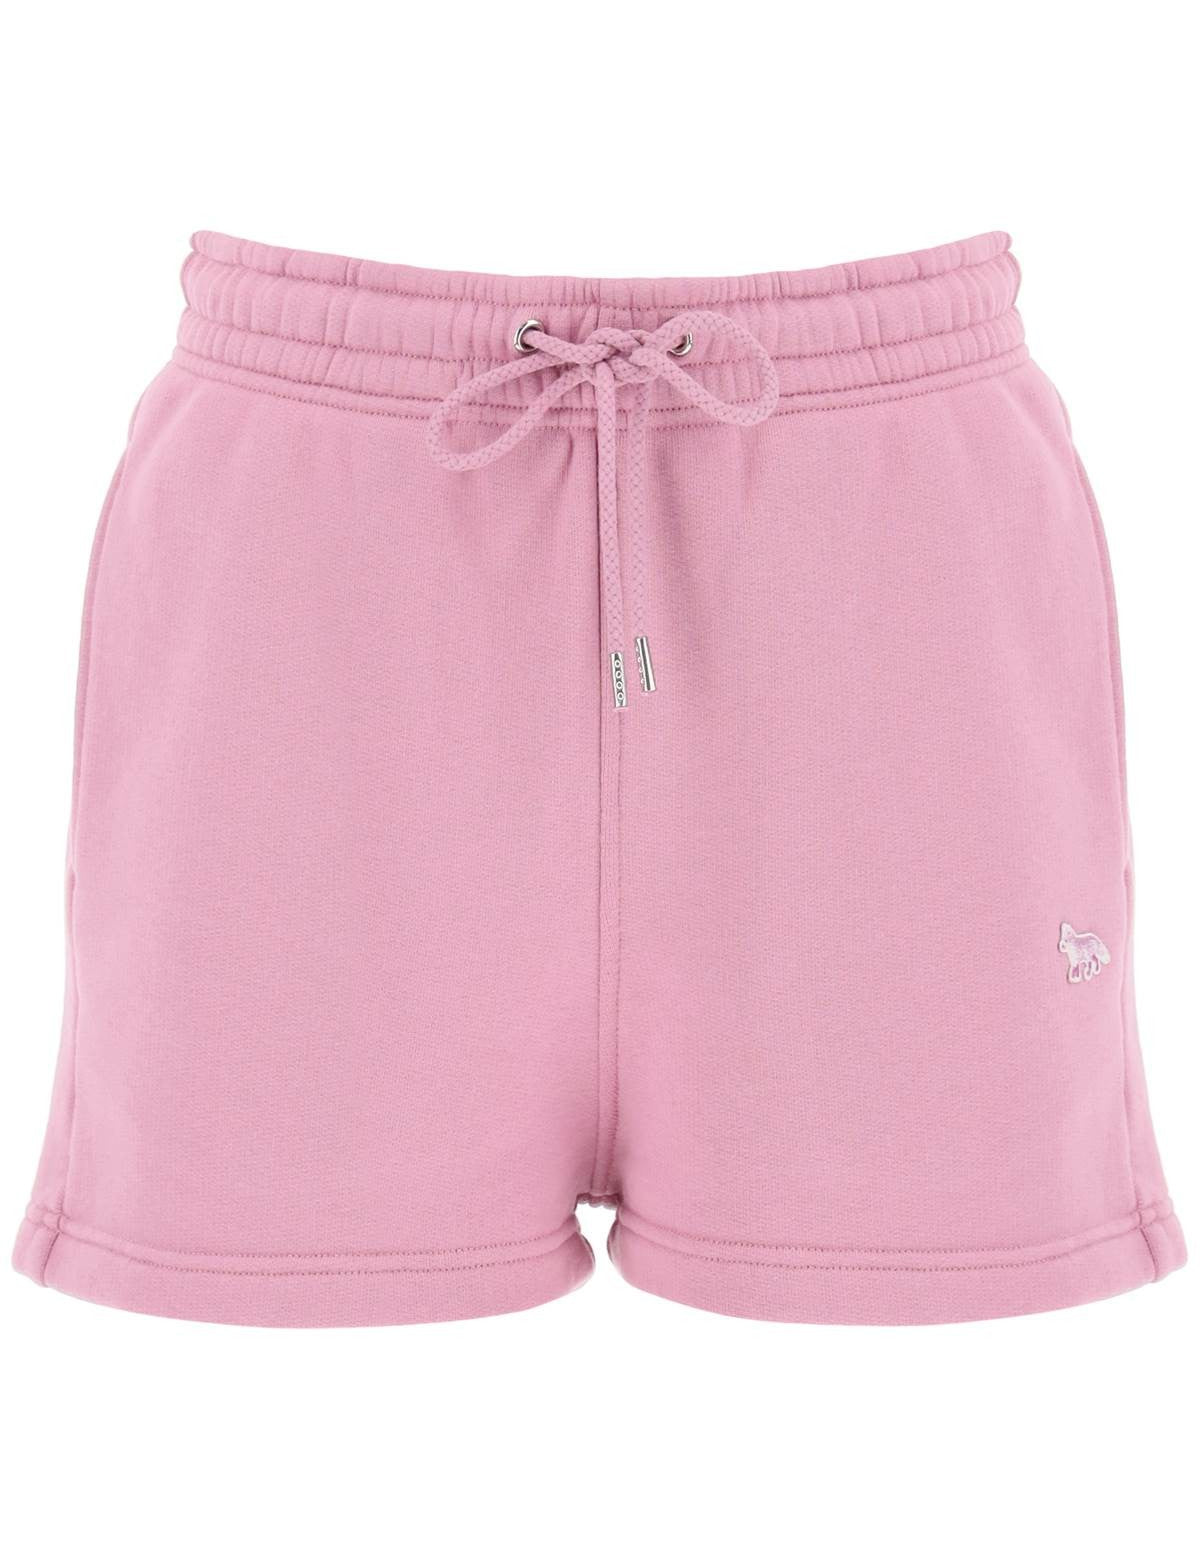 baby-fox-sports-shorts-with-patch-design.jpg